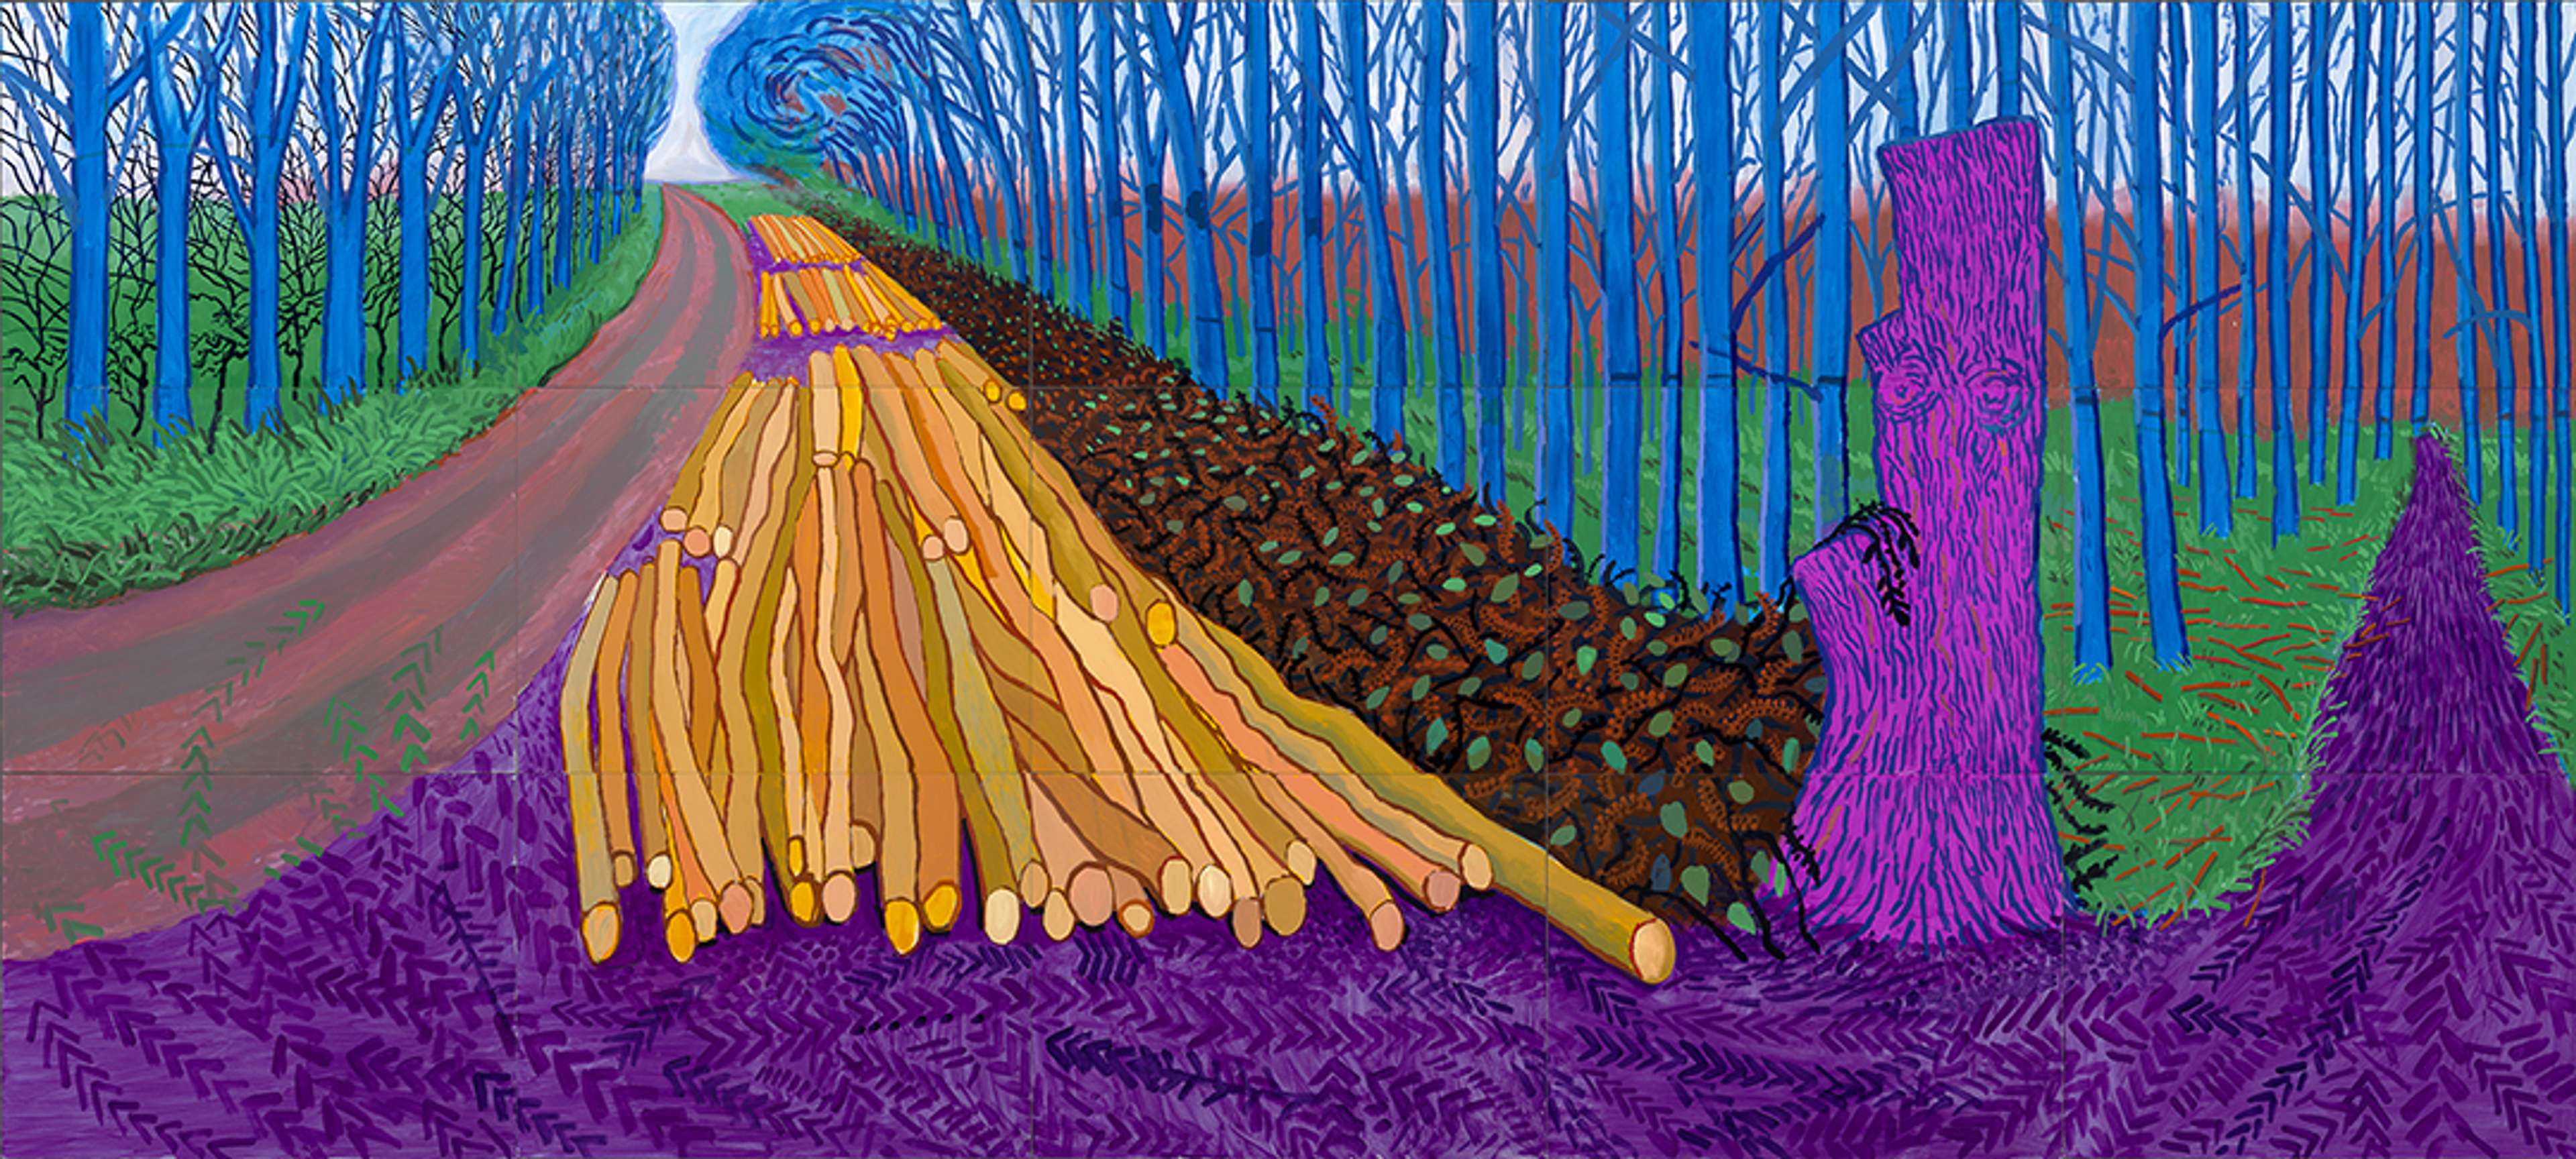 David Hockney’s Winter Timber. An oil on canvas landscape painting of a roadway next to a path of cut down logs.